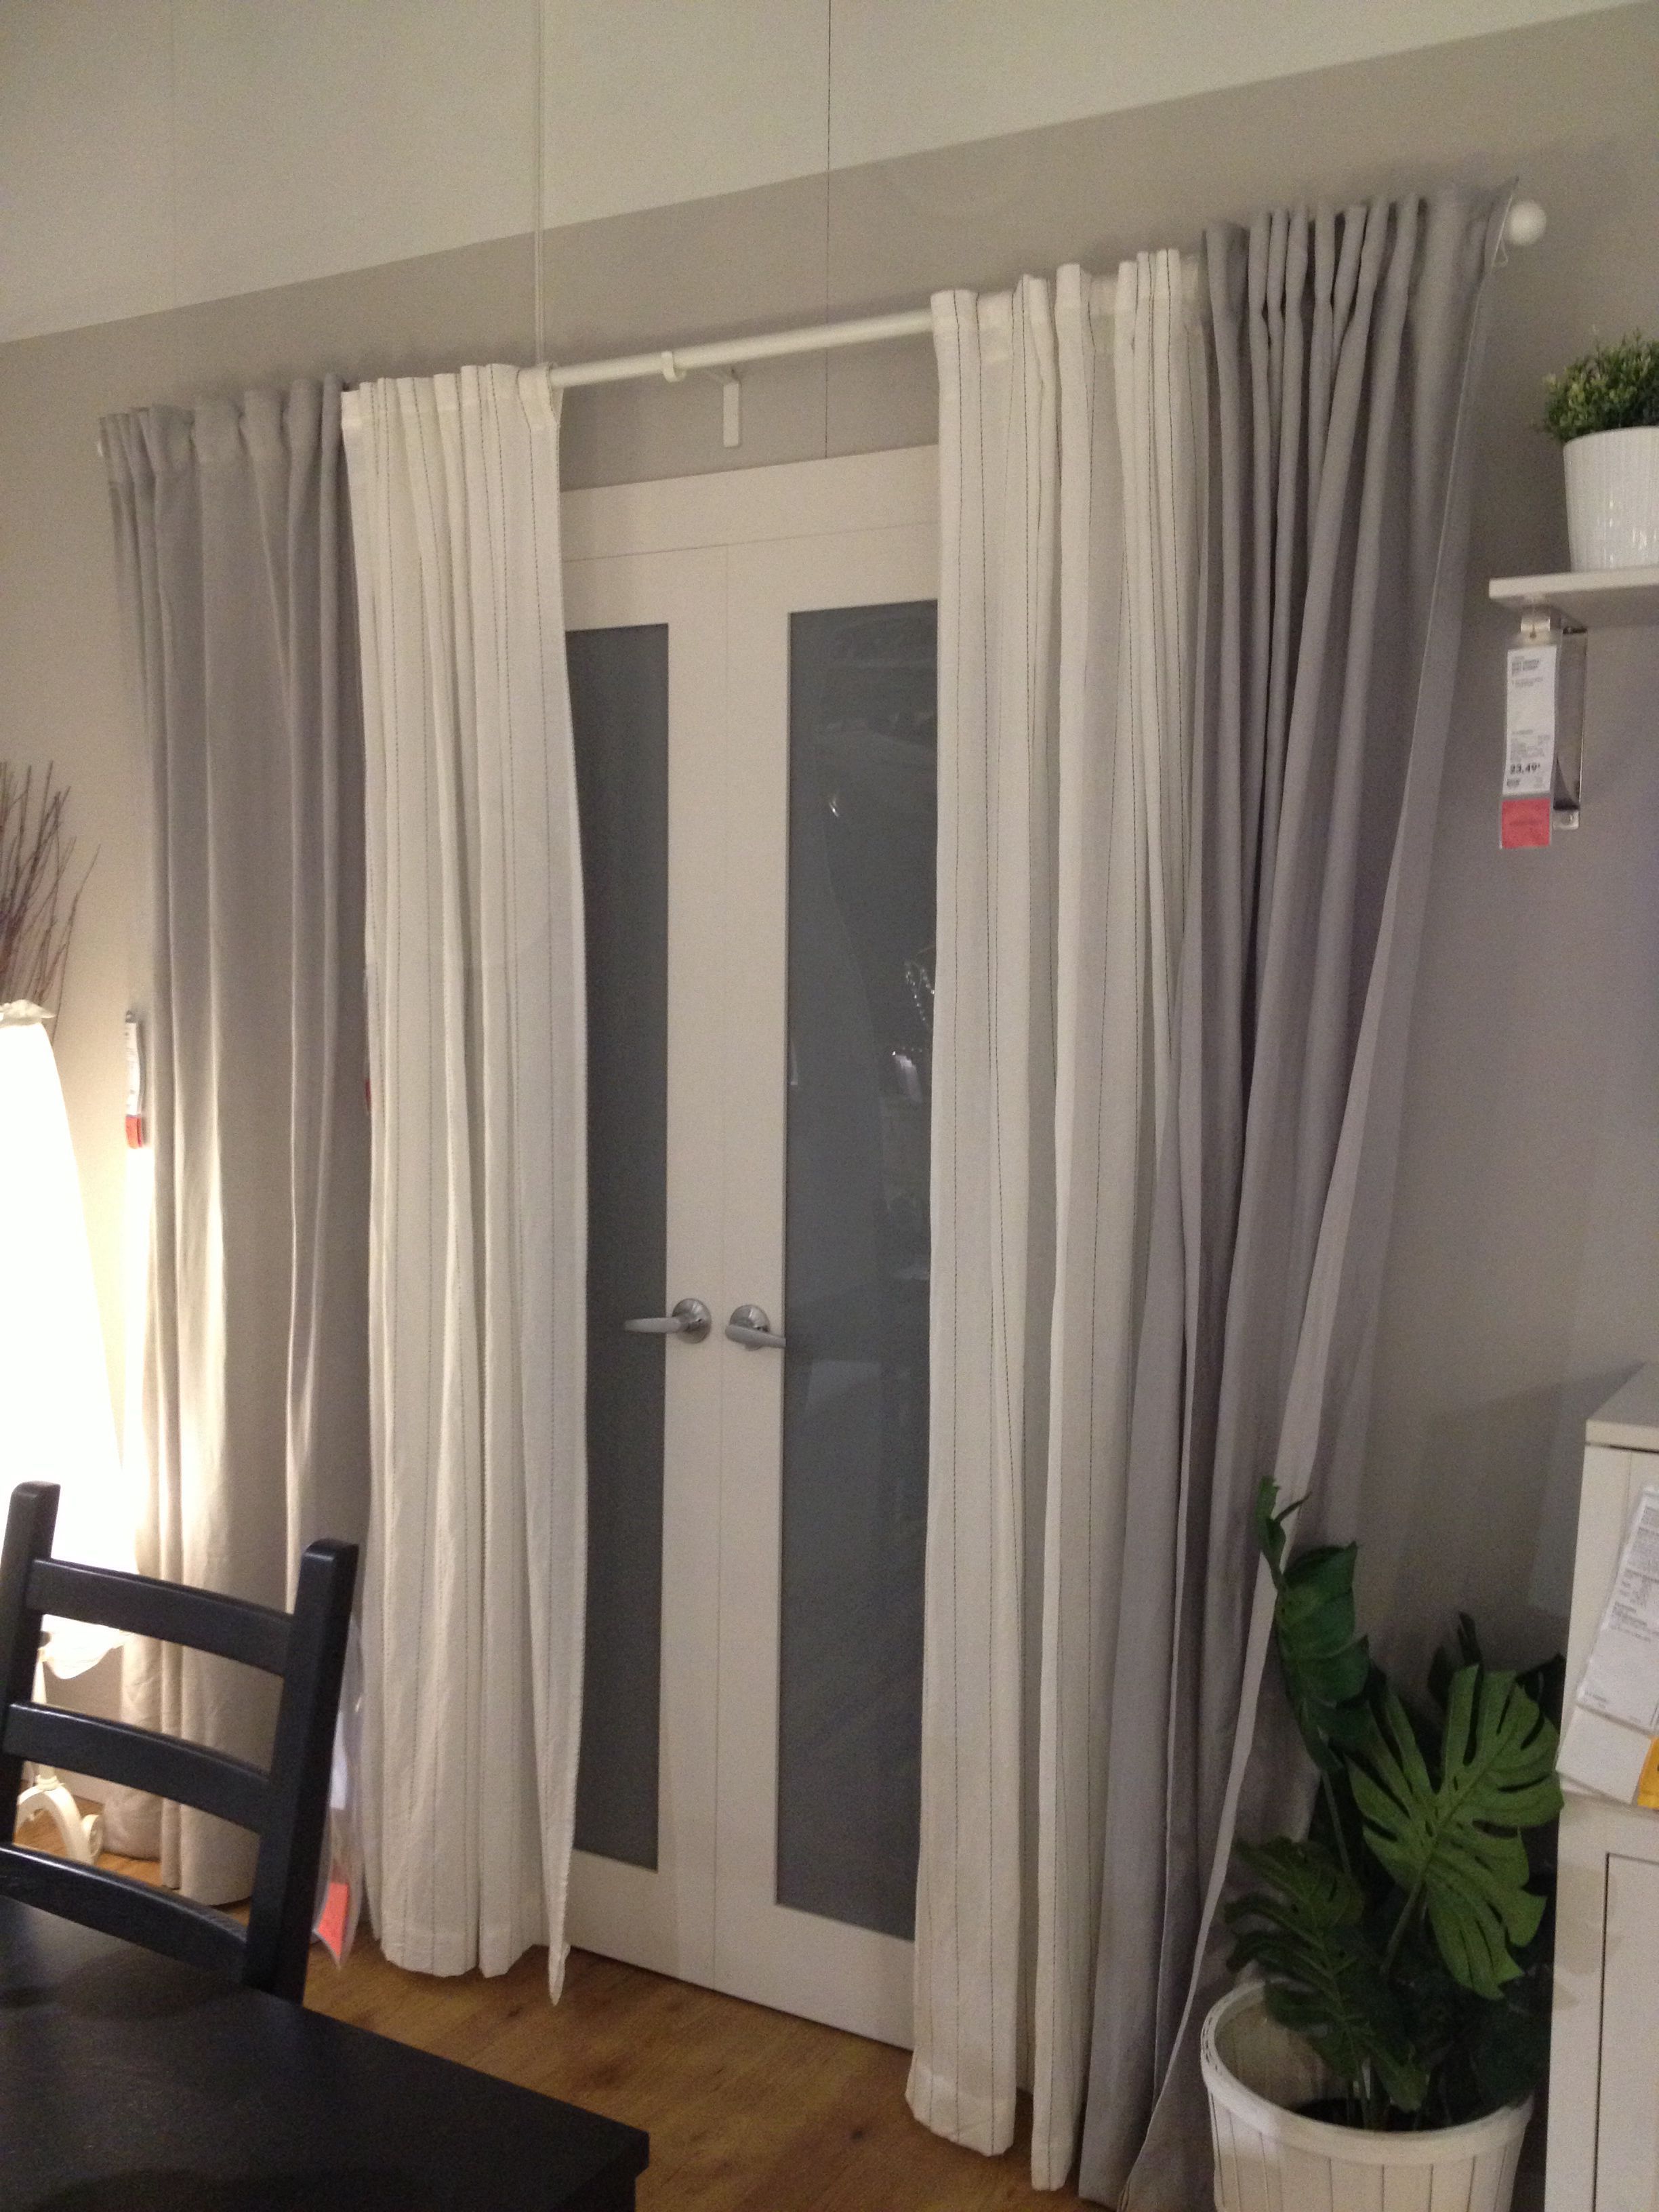 Back/patio door curtains -let sunlight in during the day  -keep people from looking in at night! -   22 patio door decor
 ideas